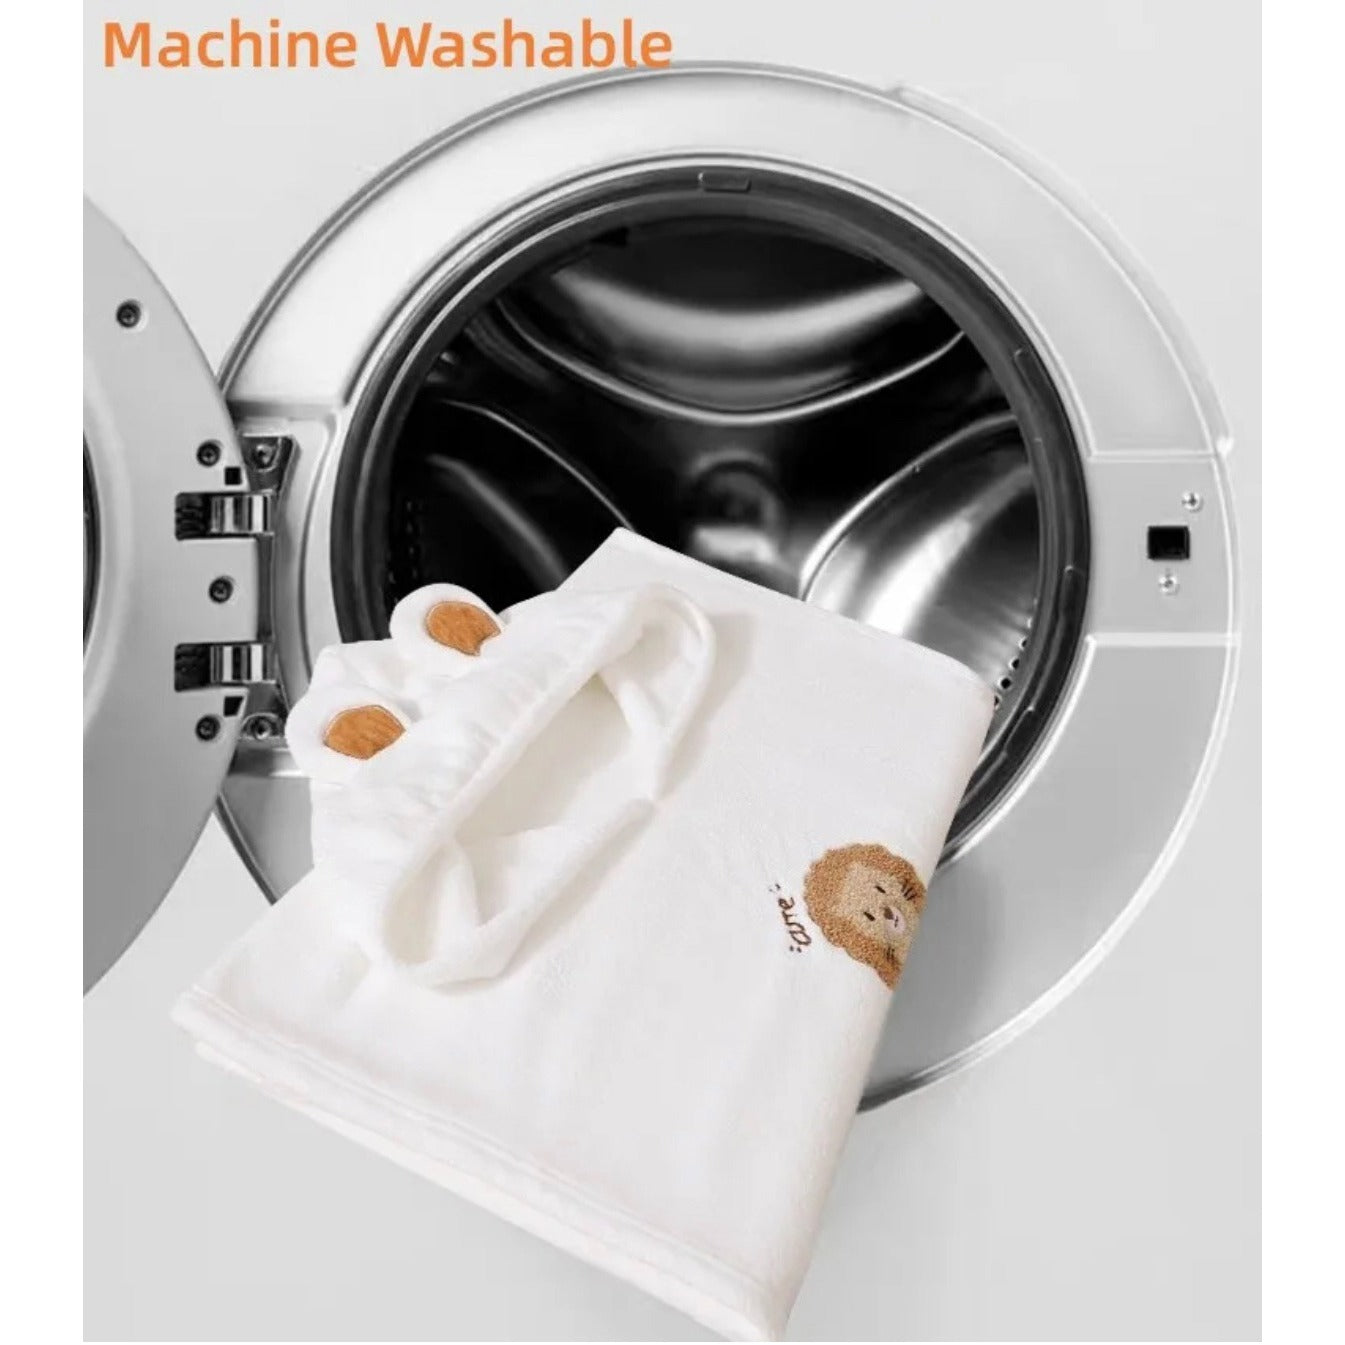 Inserting Quick-Drying Hooded Bathrobe into a washing machine to easy wash